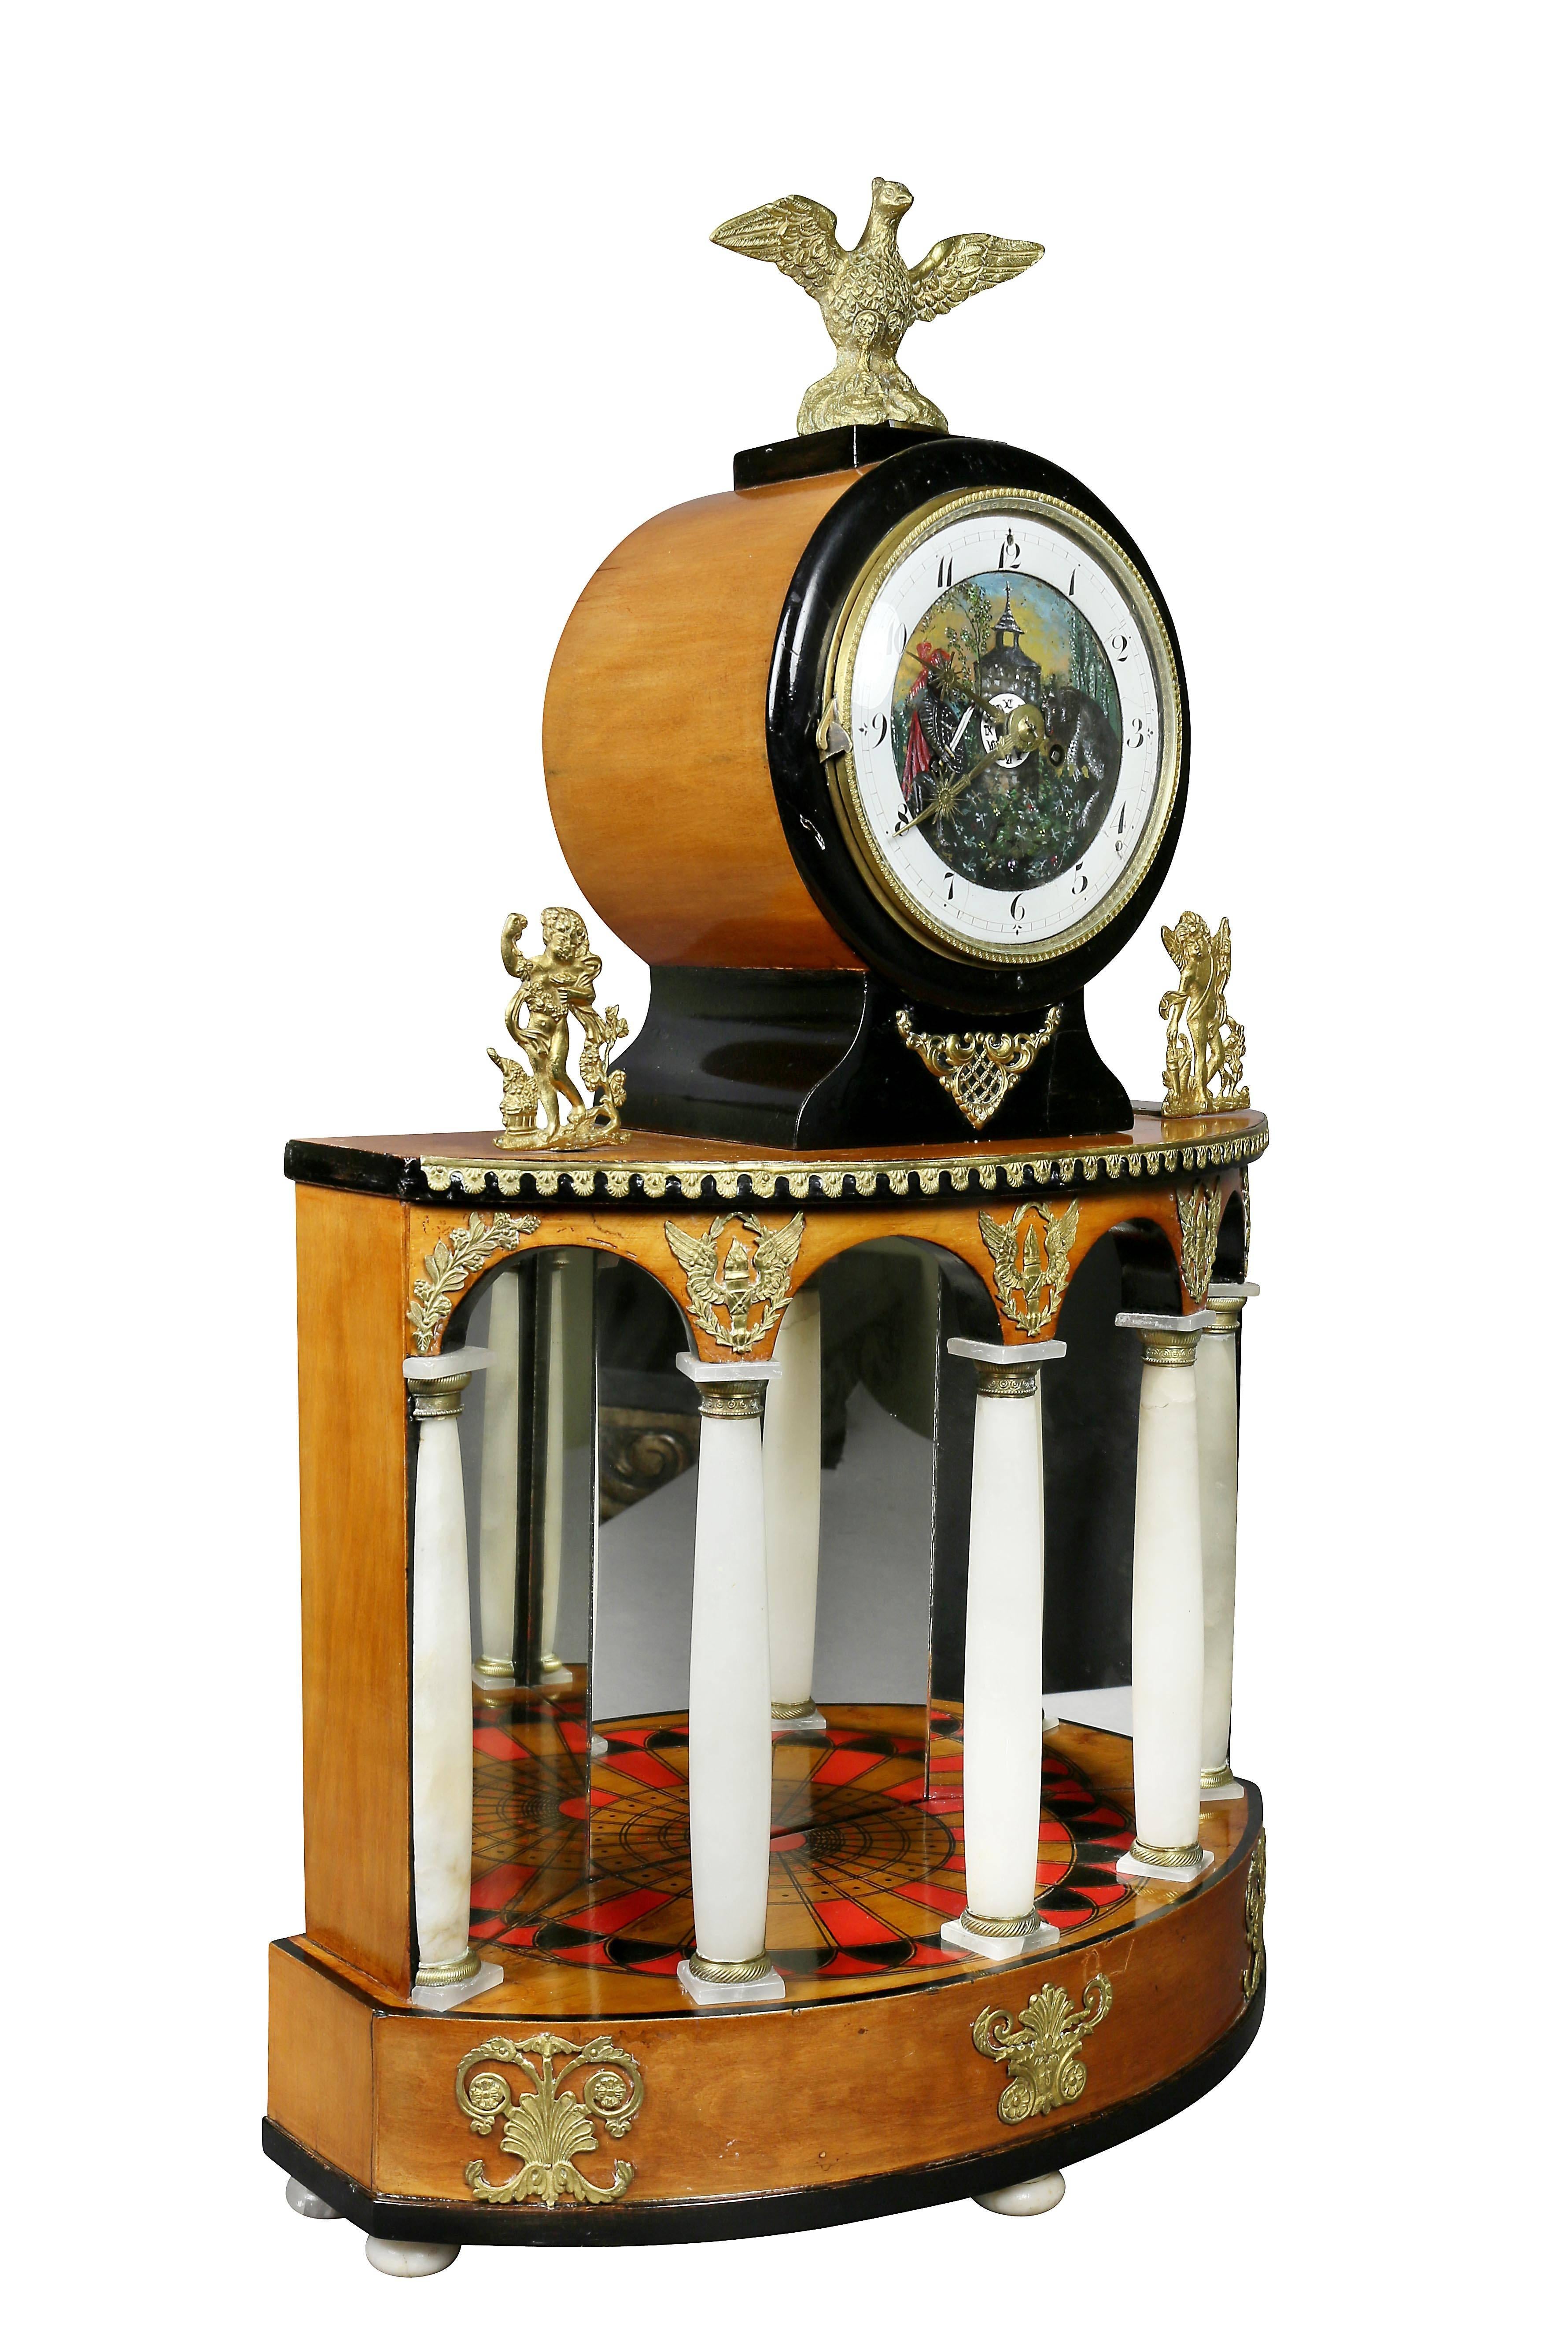 With eagle finial over an enameled and painted clock face over an inlaid portico with mirror back and alabaster columns on a plinth base.